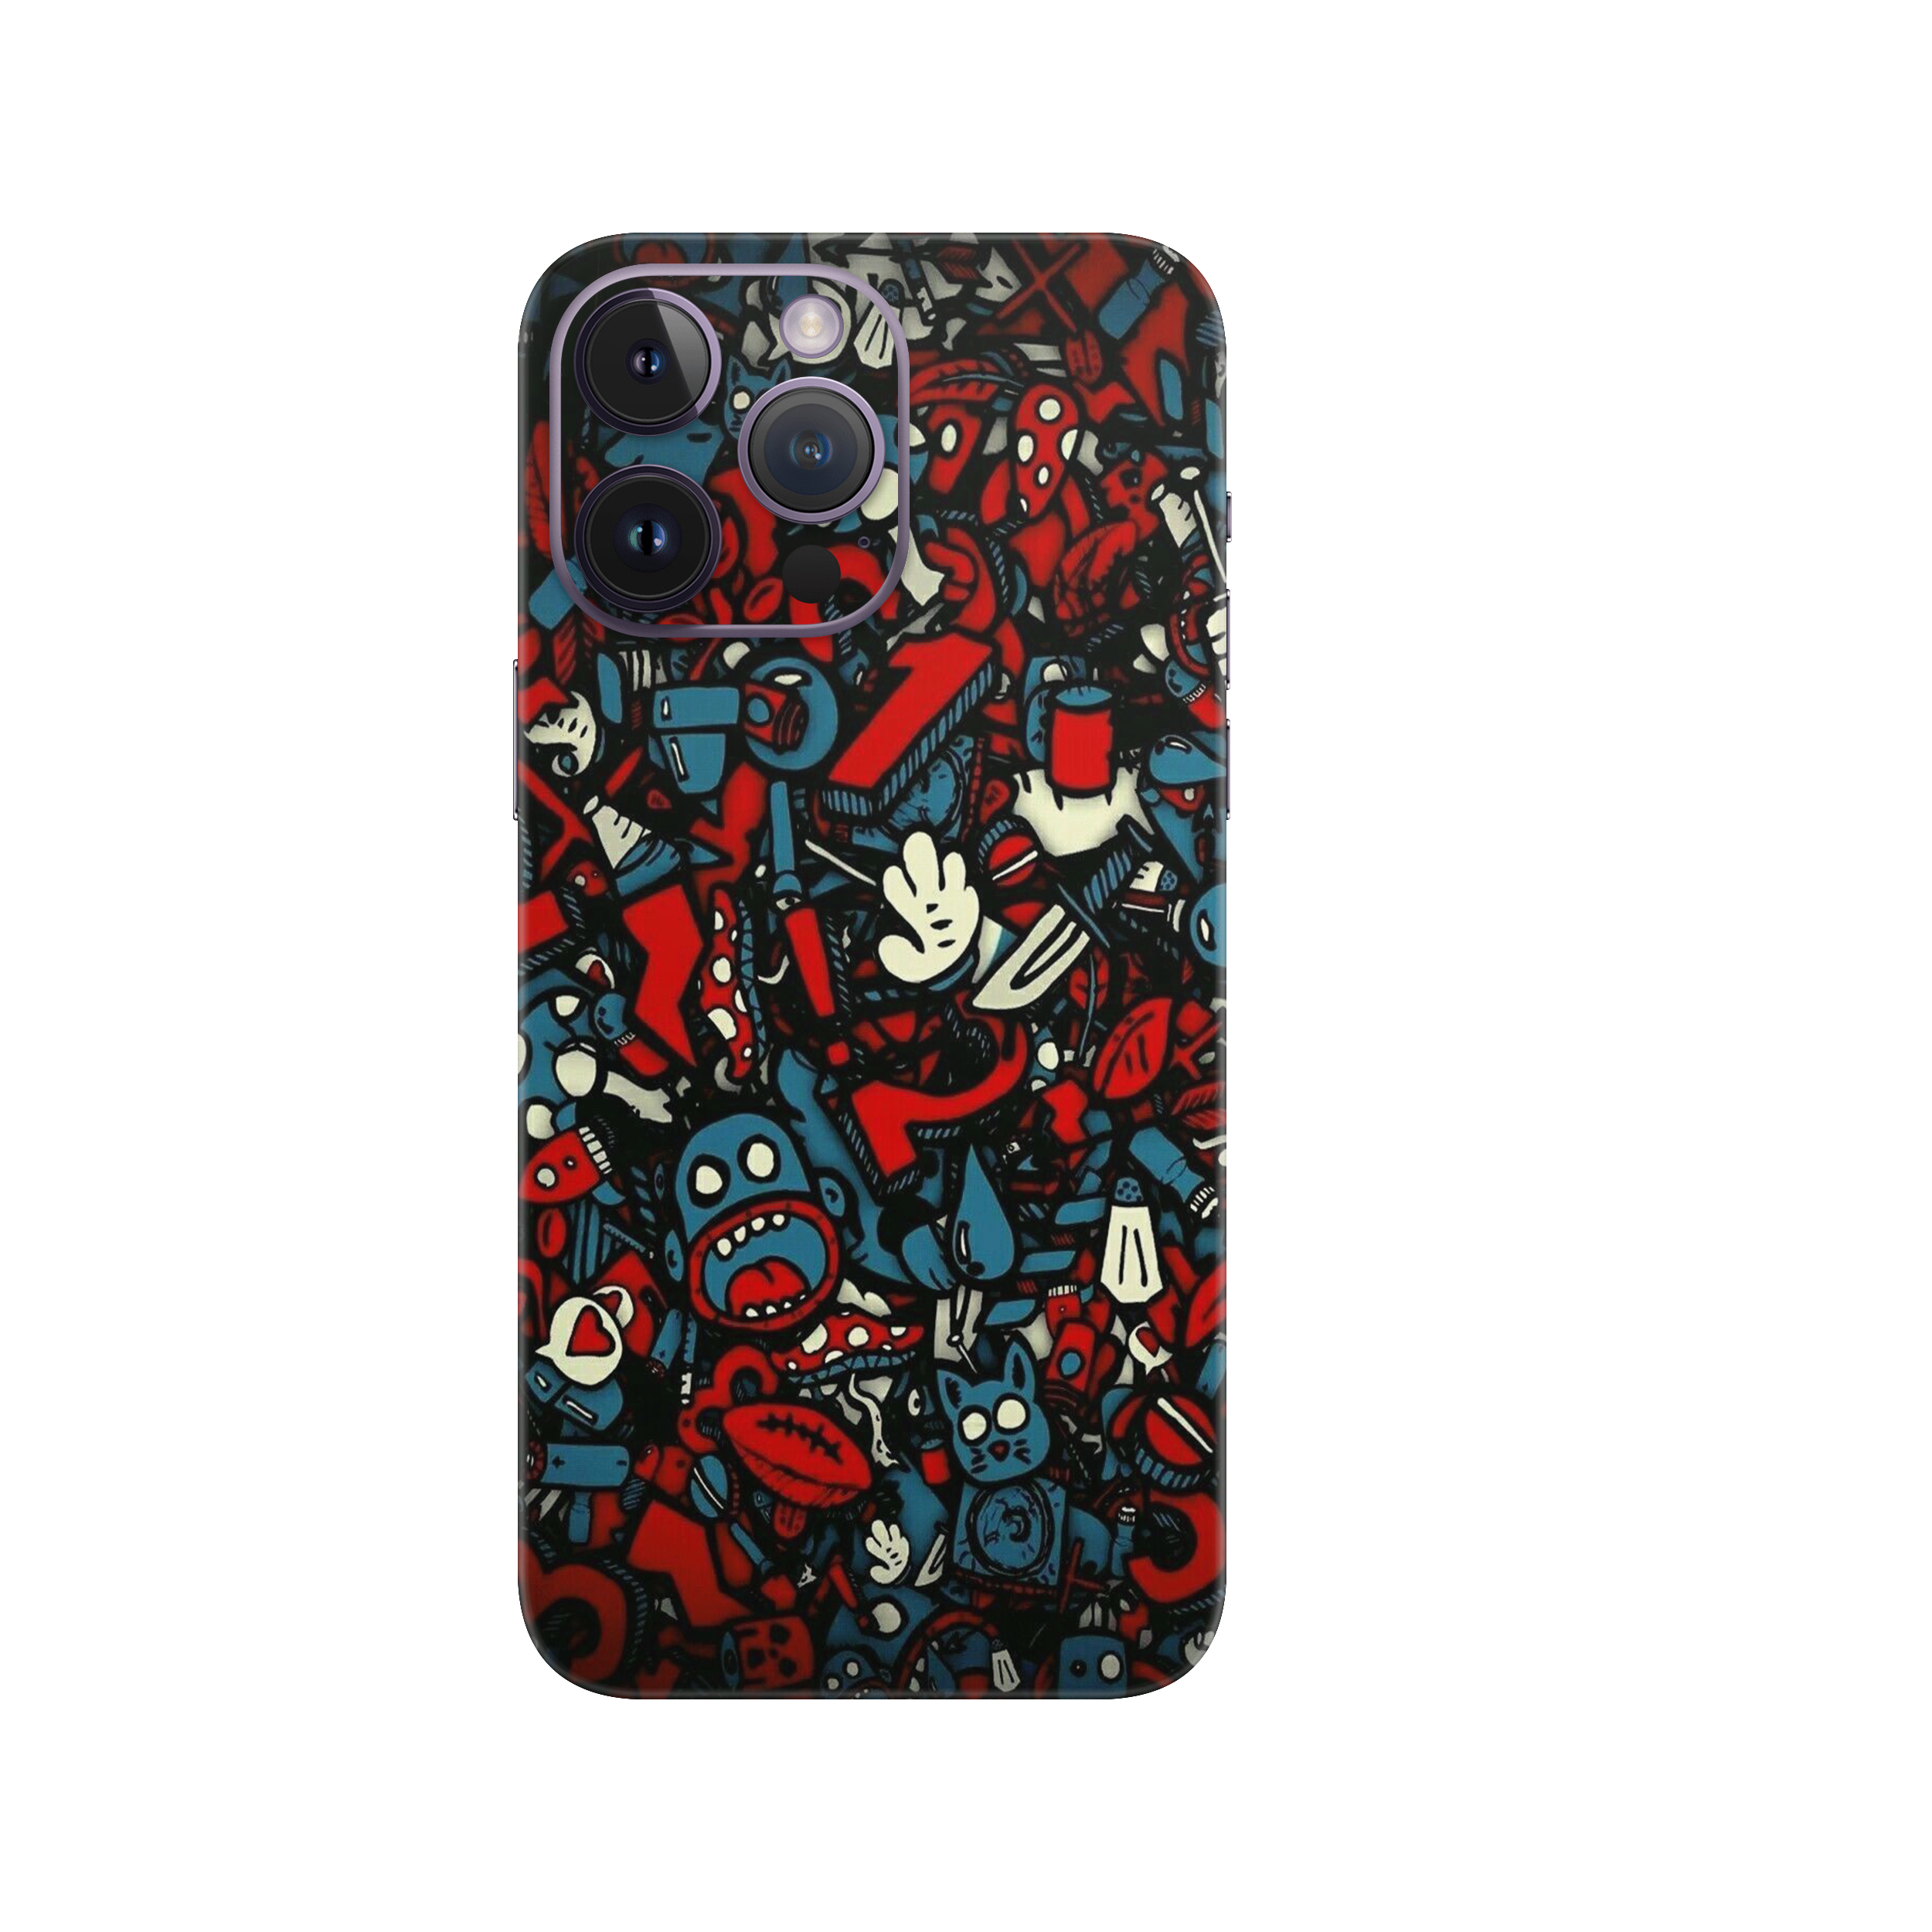 Doodly Doo Skin For iPhone